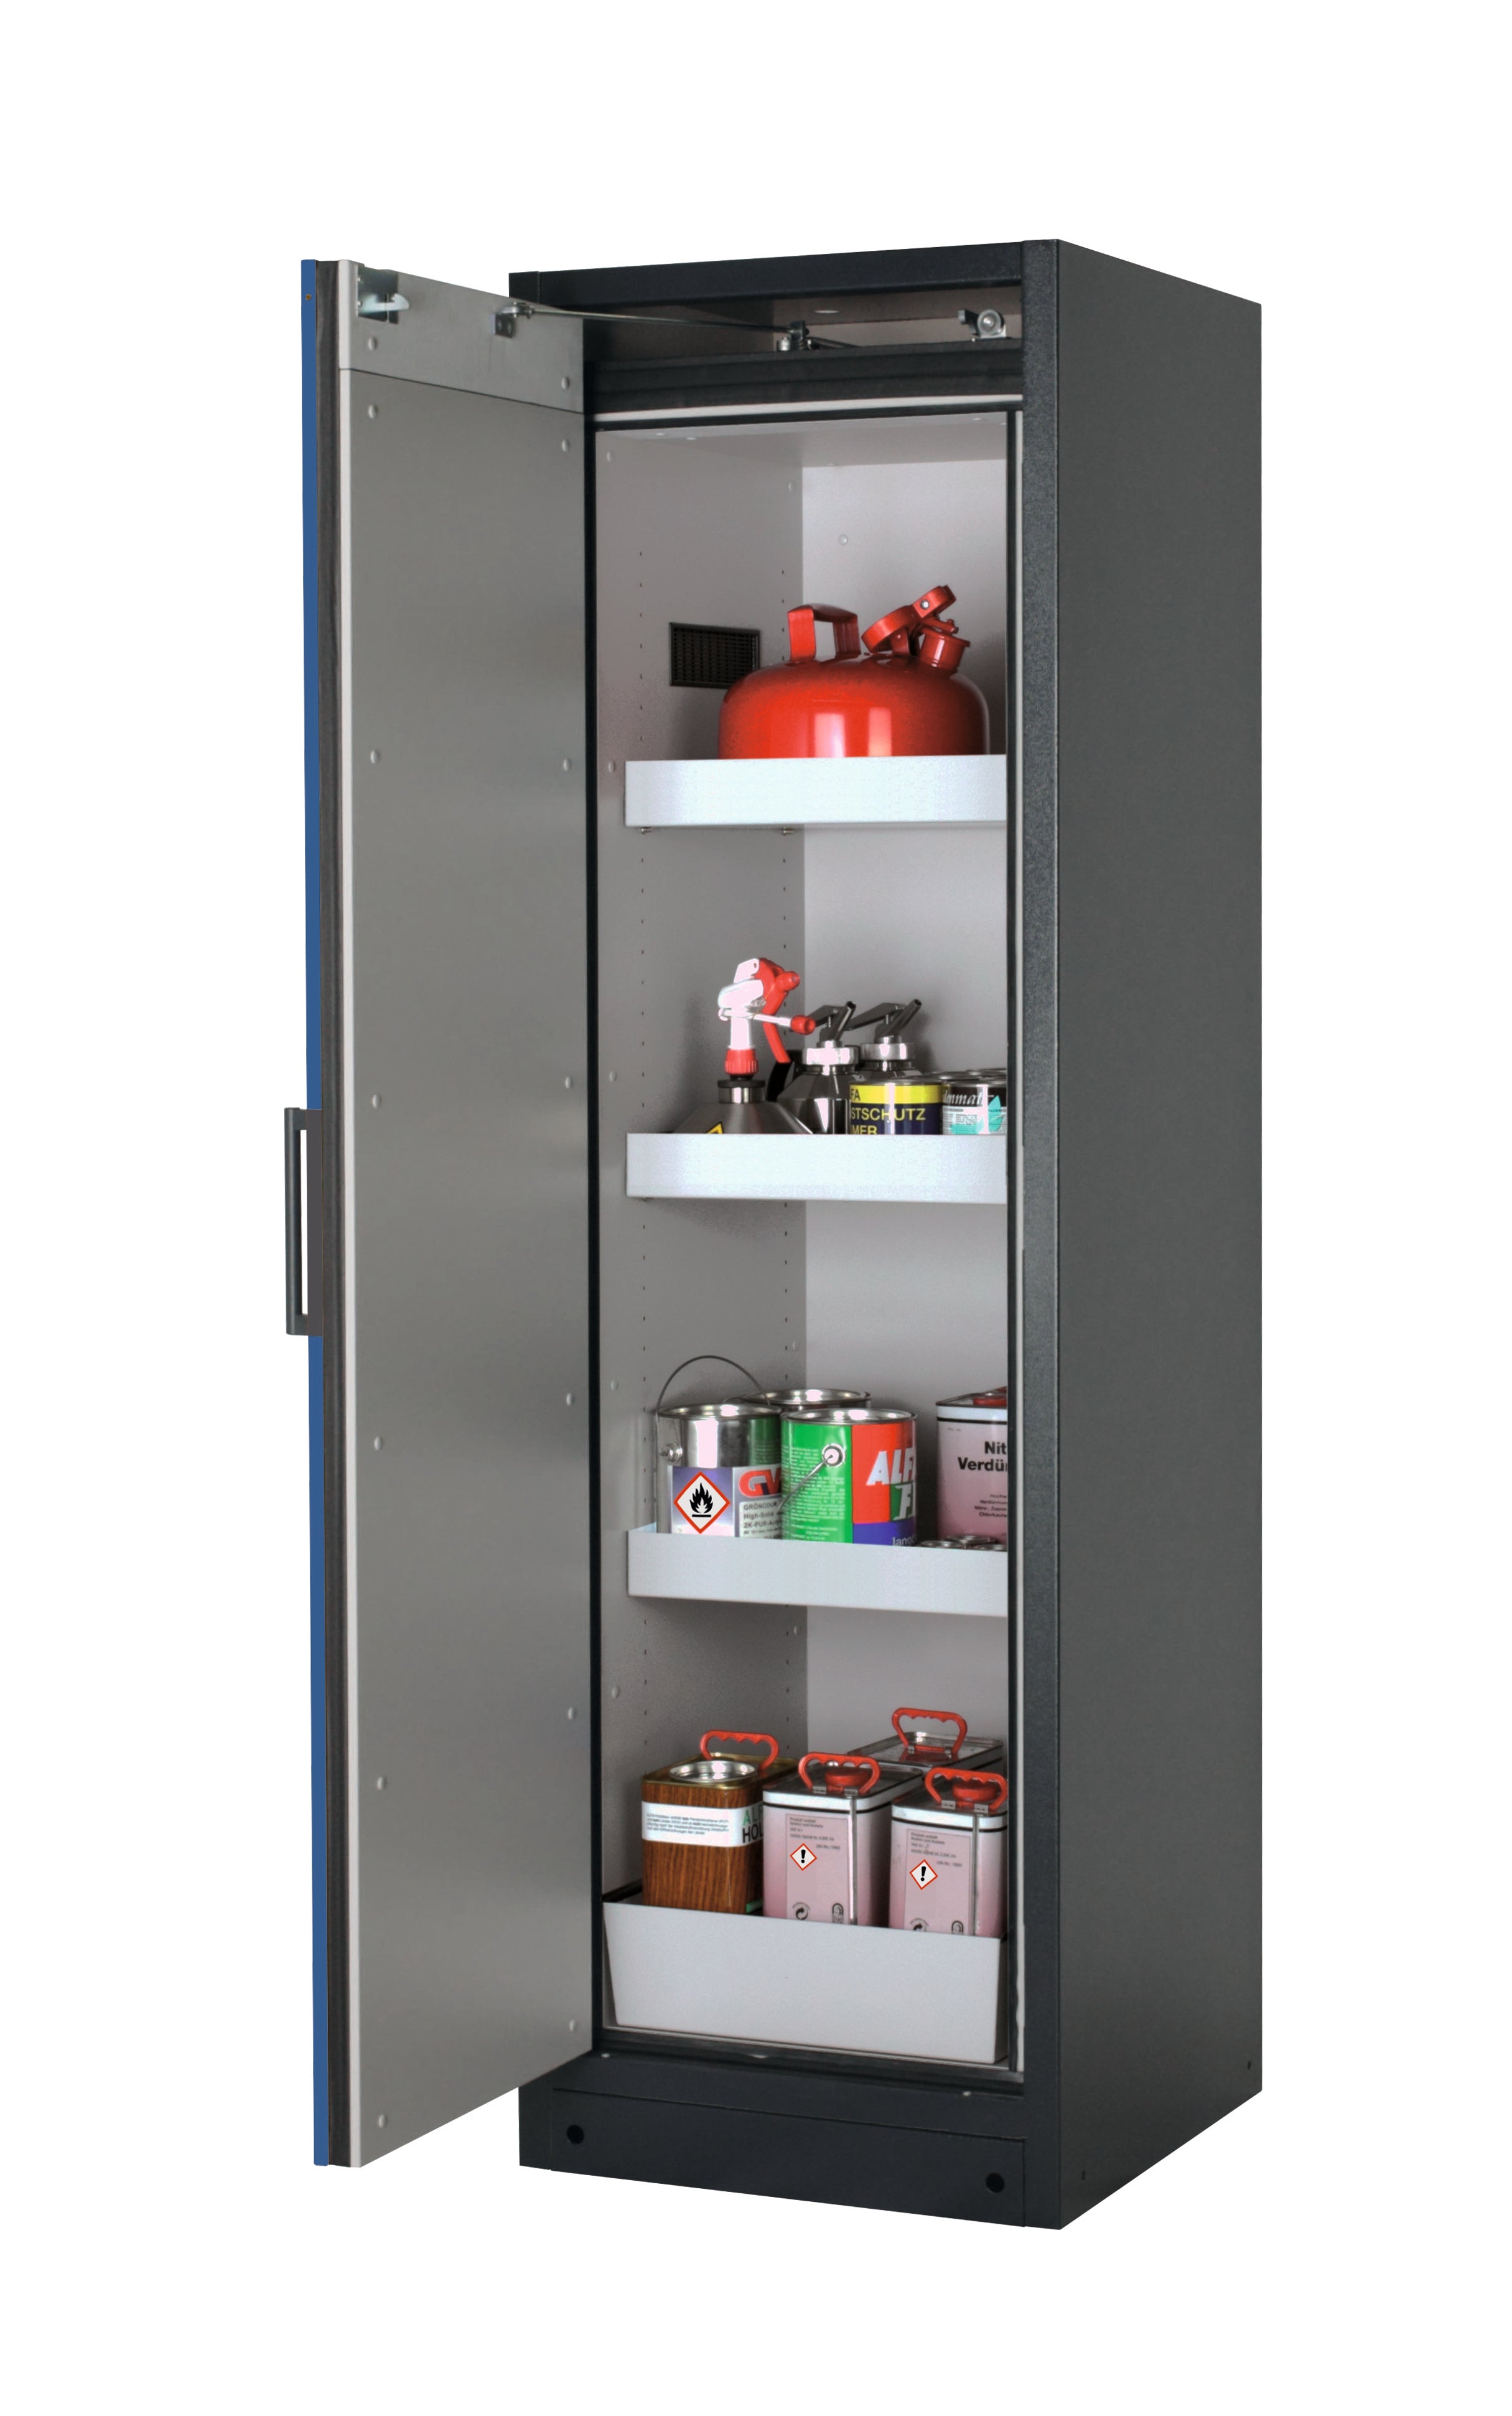 Type 90 safety storage cabinet Q-PEGASUS-90 model Q90.195.060.WDAC in gentian blue RAL 5010 with 3x tray shelf (standard) (sheet steel),